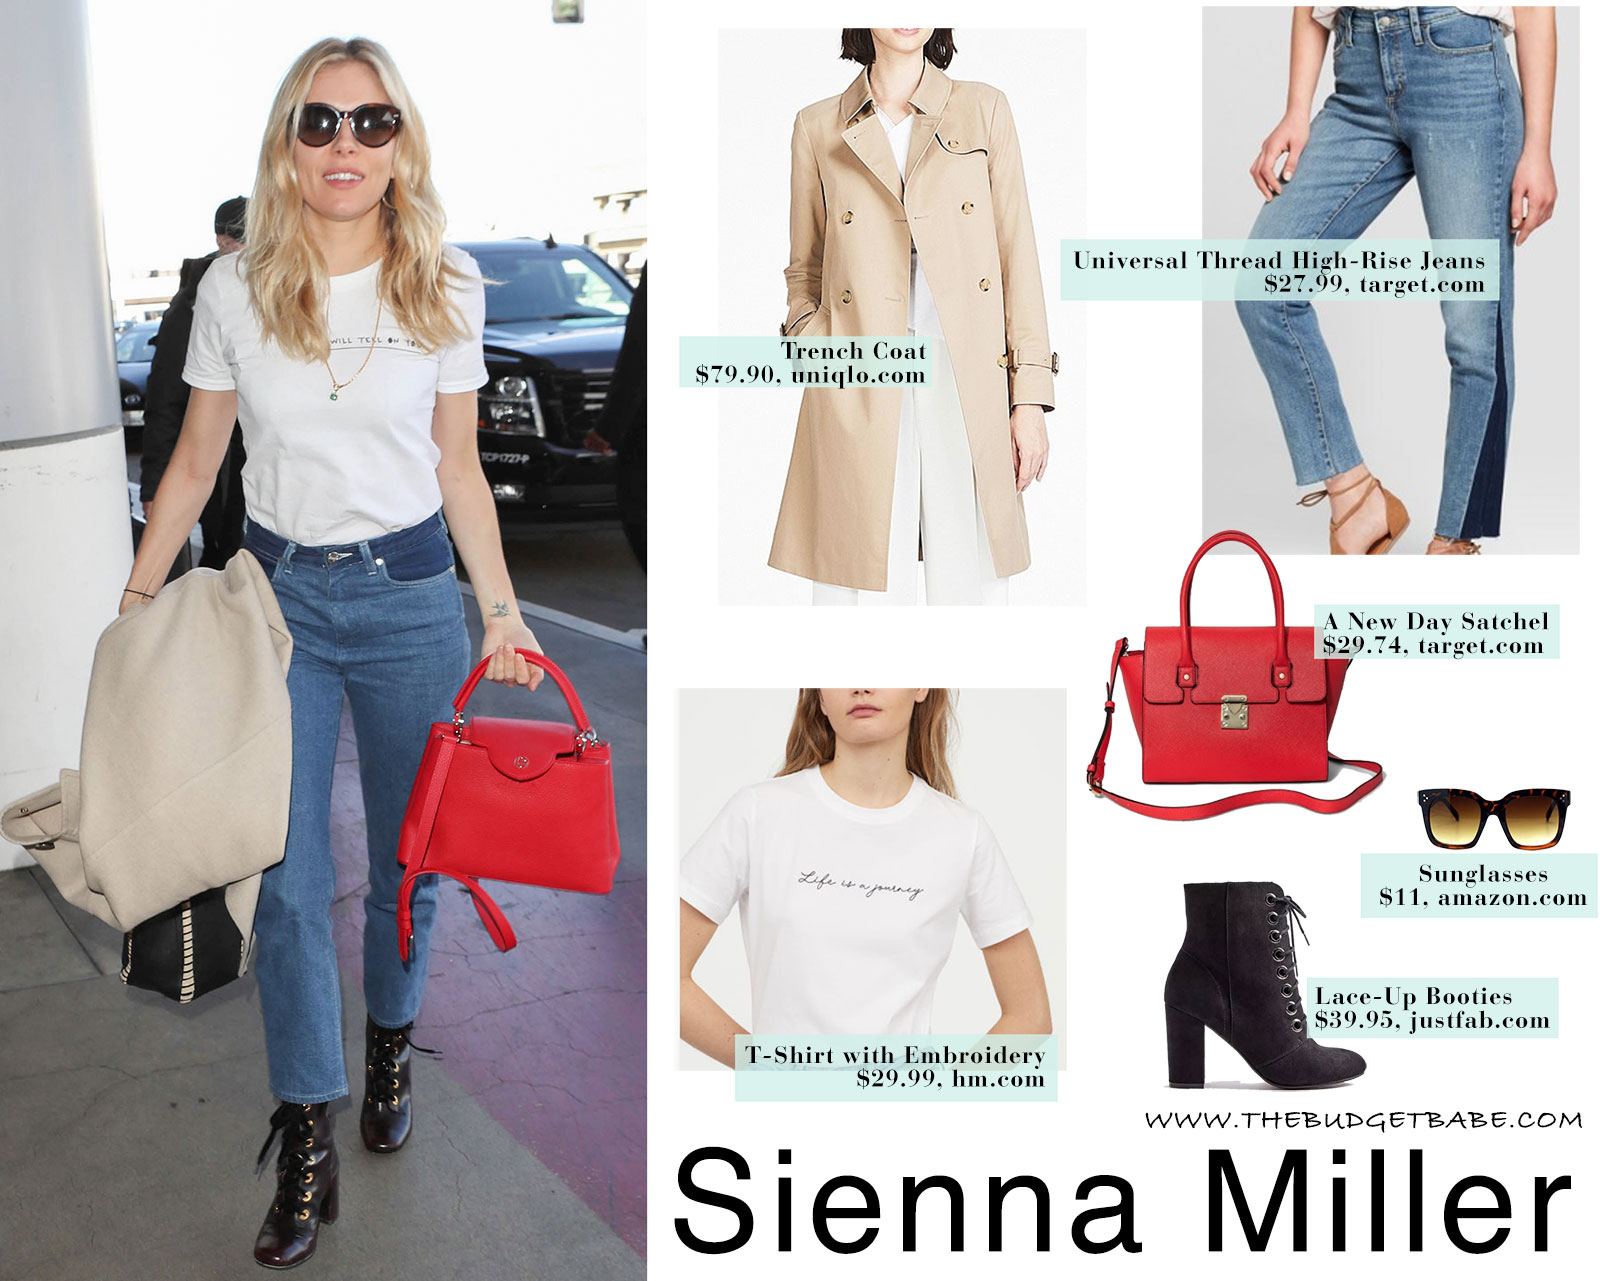 Sienna Miller's white t-shirt, high-rise jeans, black ankle boots and red purse look for less